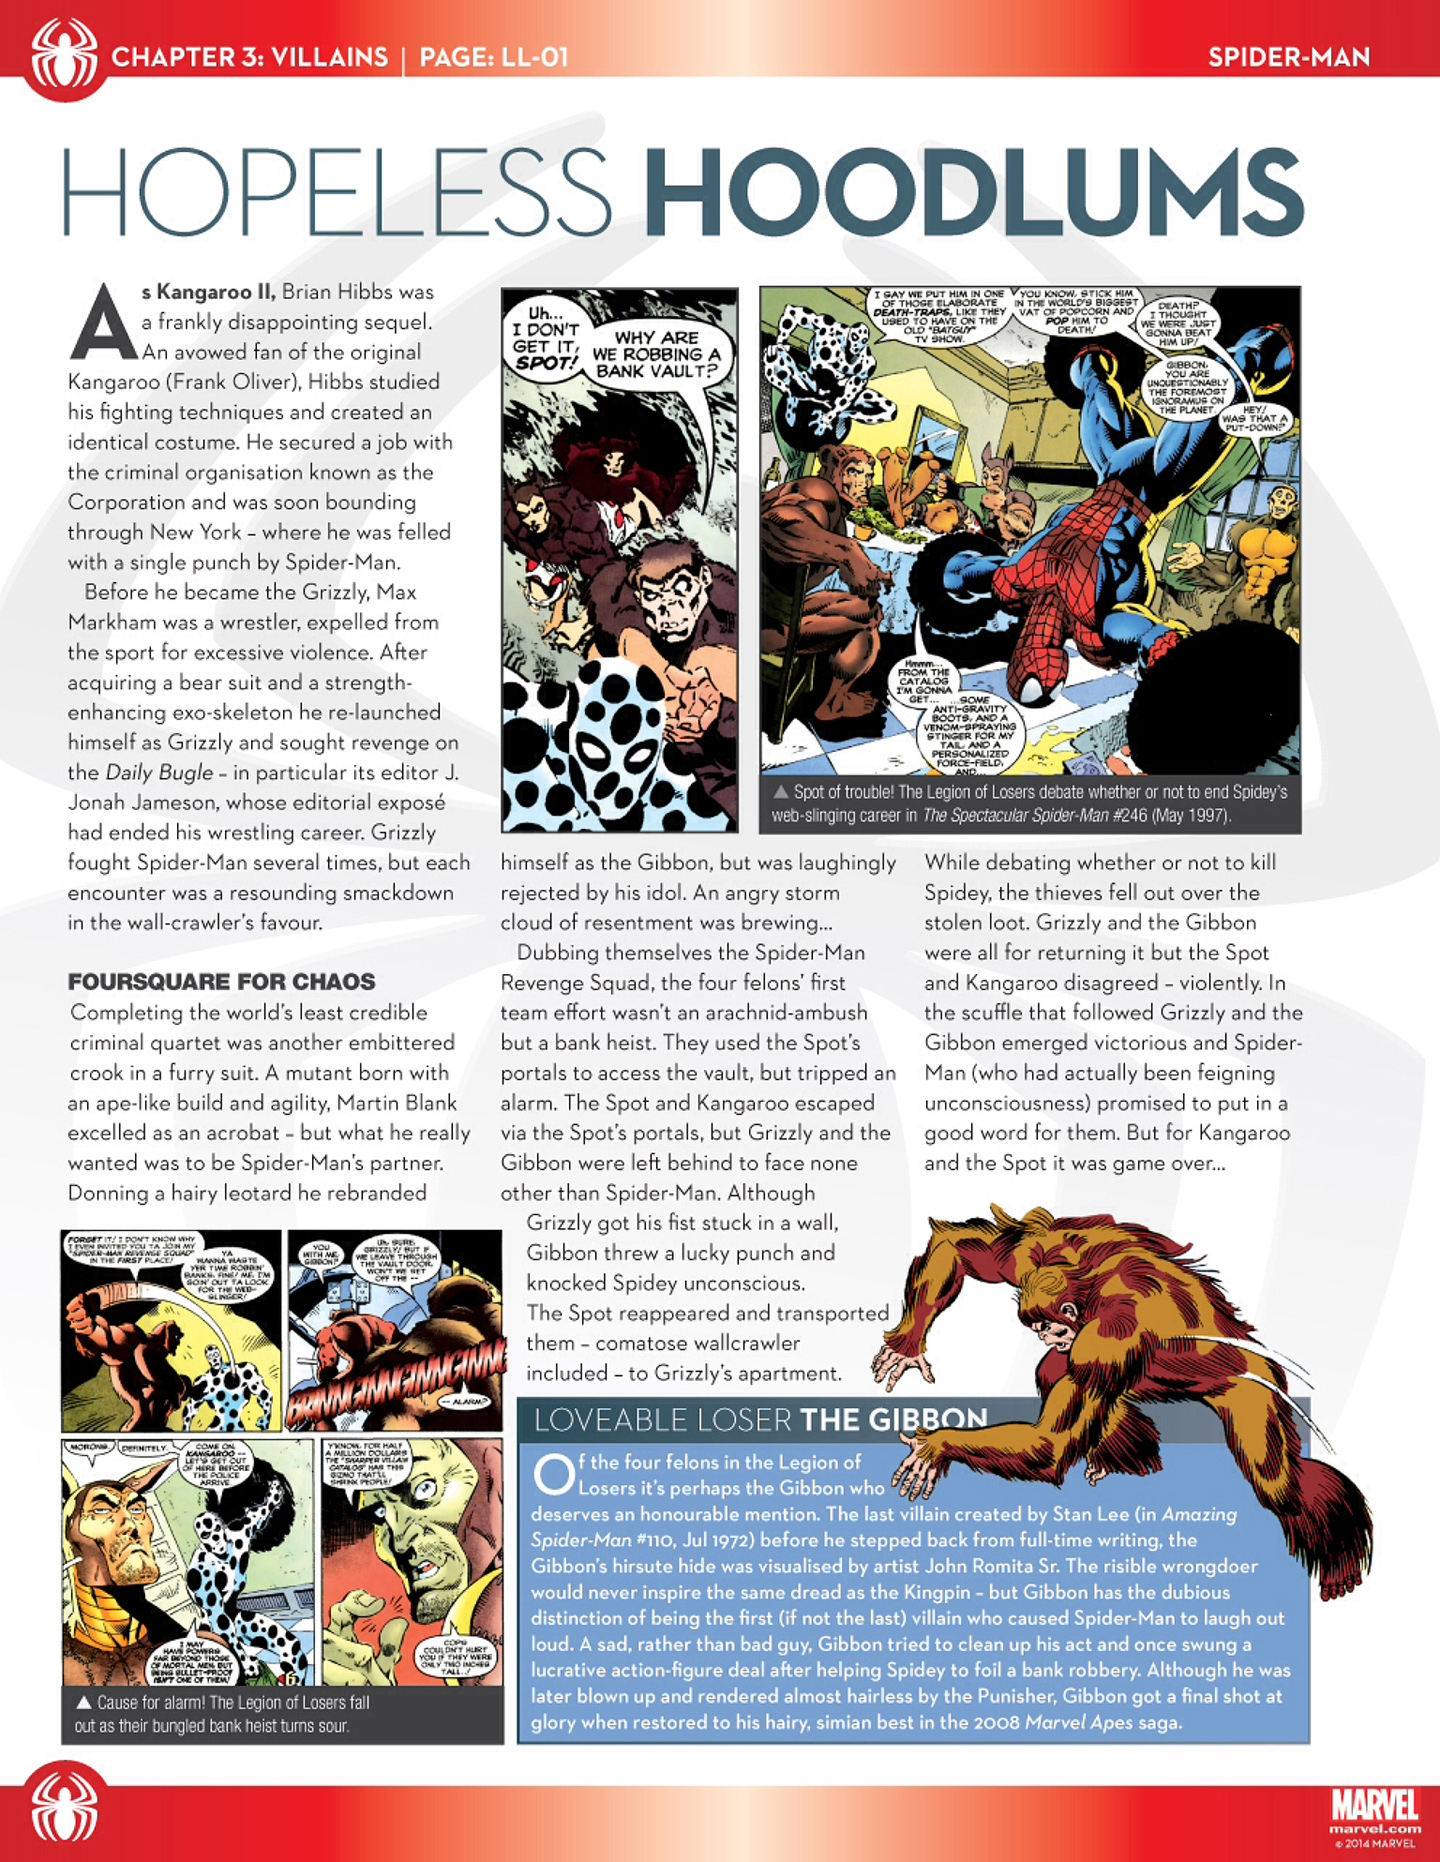 Read online Marvel Fact Files comic -  Issue #53 - 25